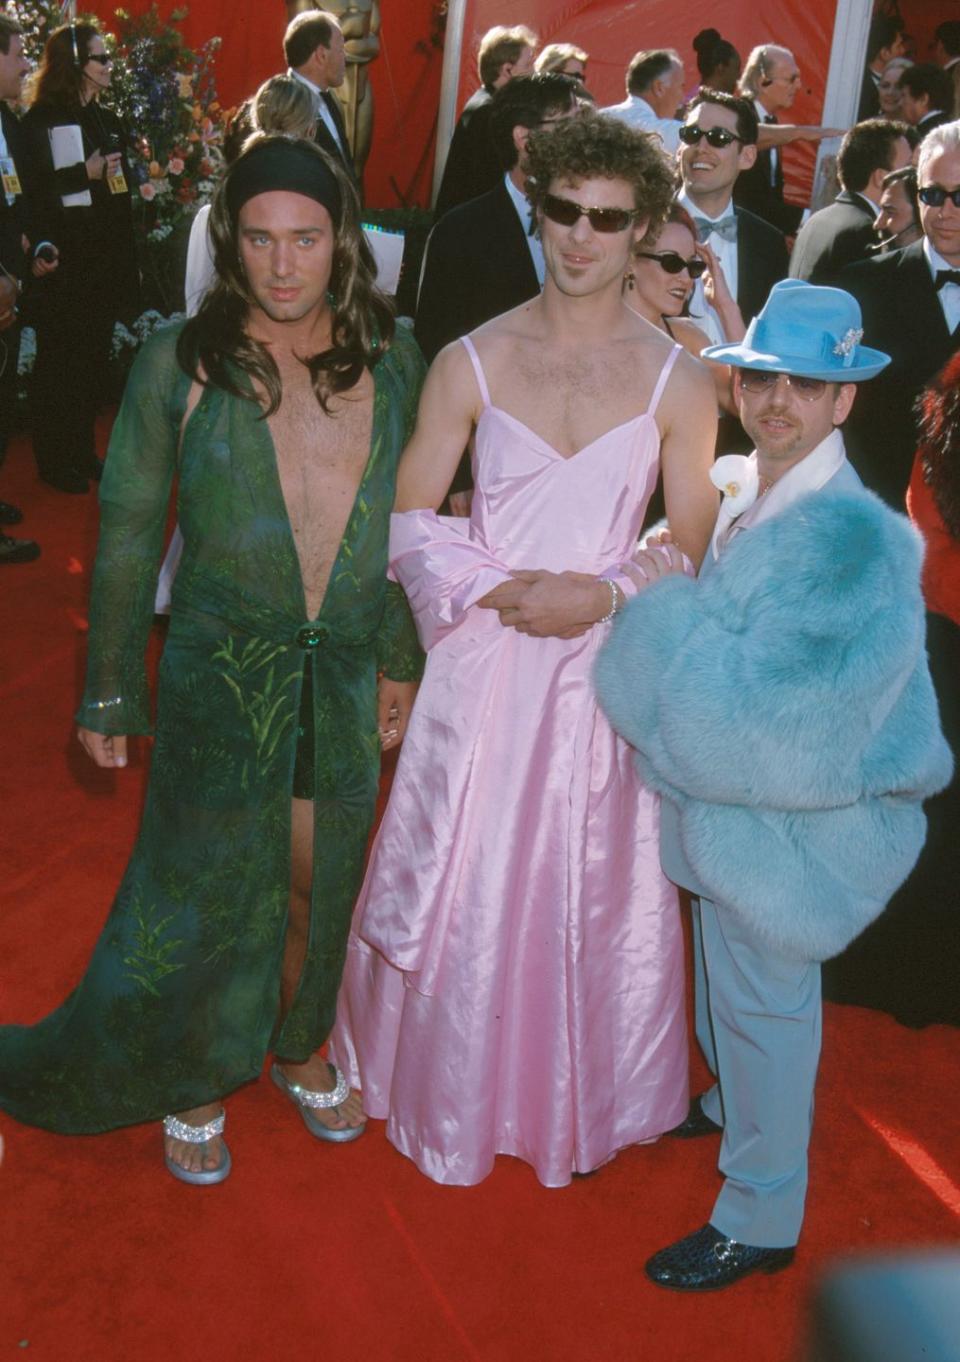 2000: When the 'South Park' creators mimicked iconic red carpet looks while high